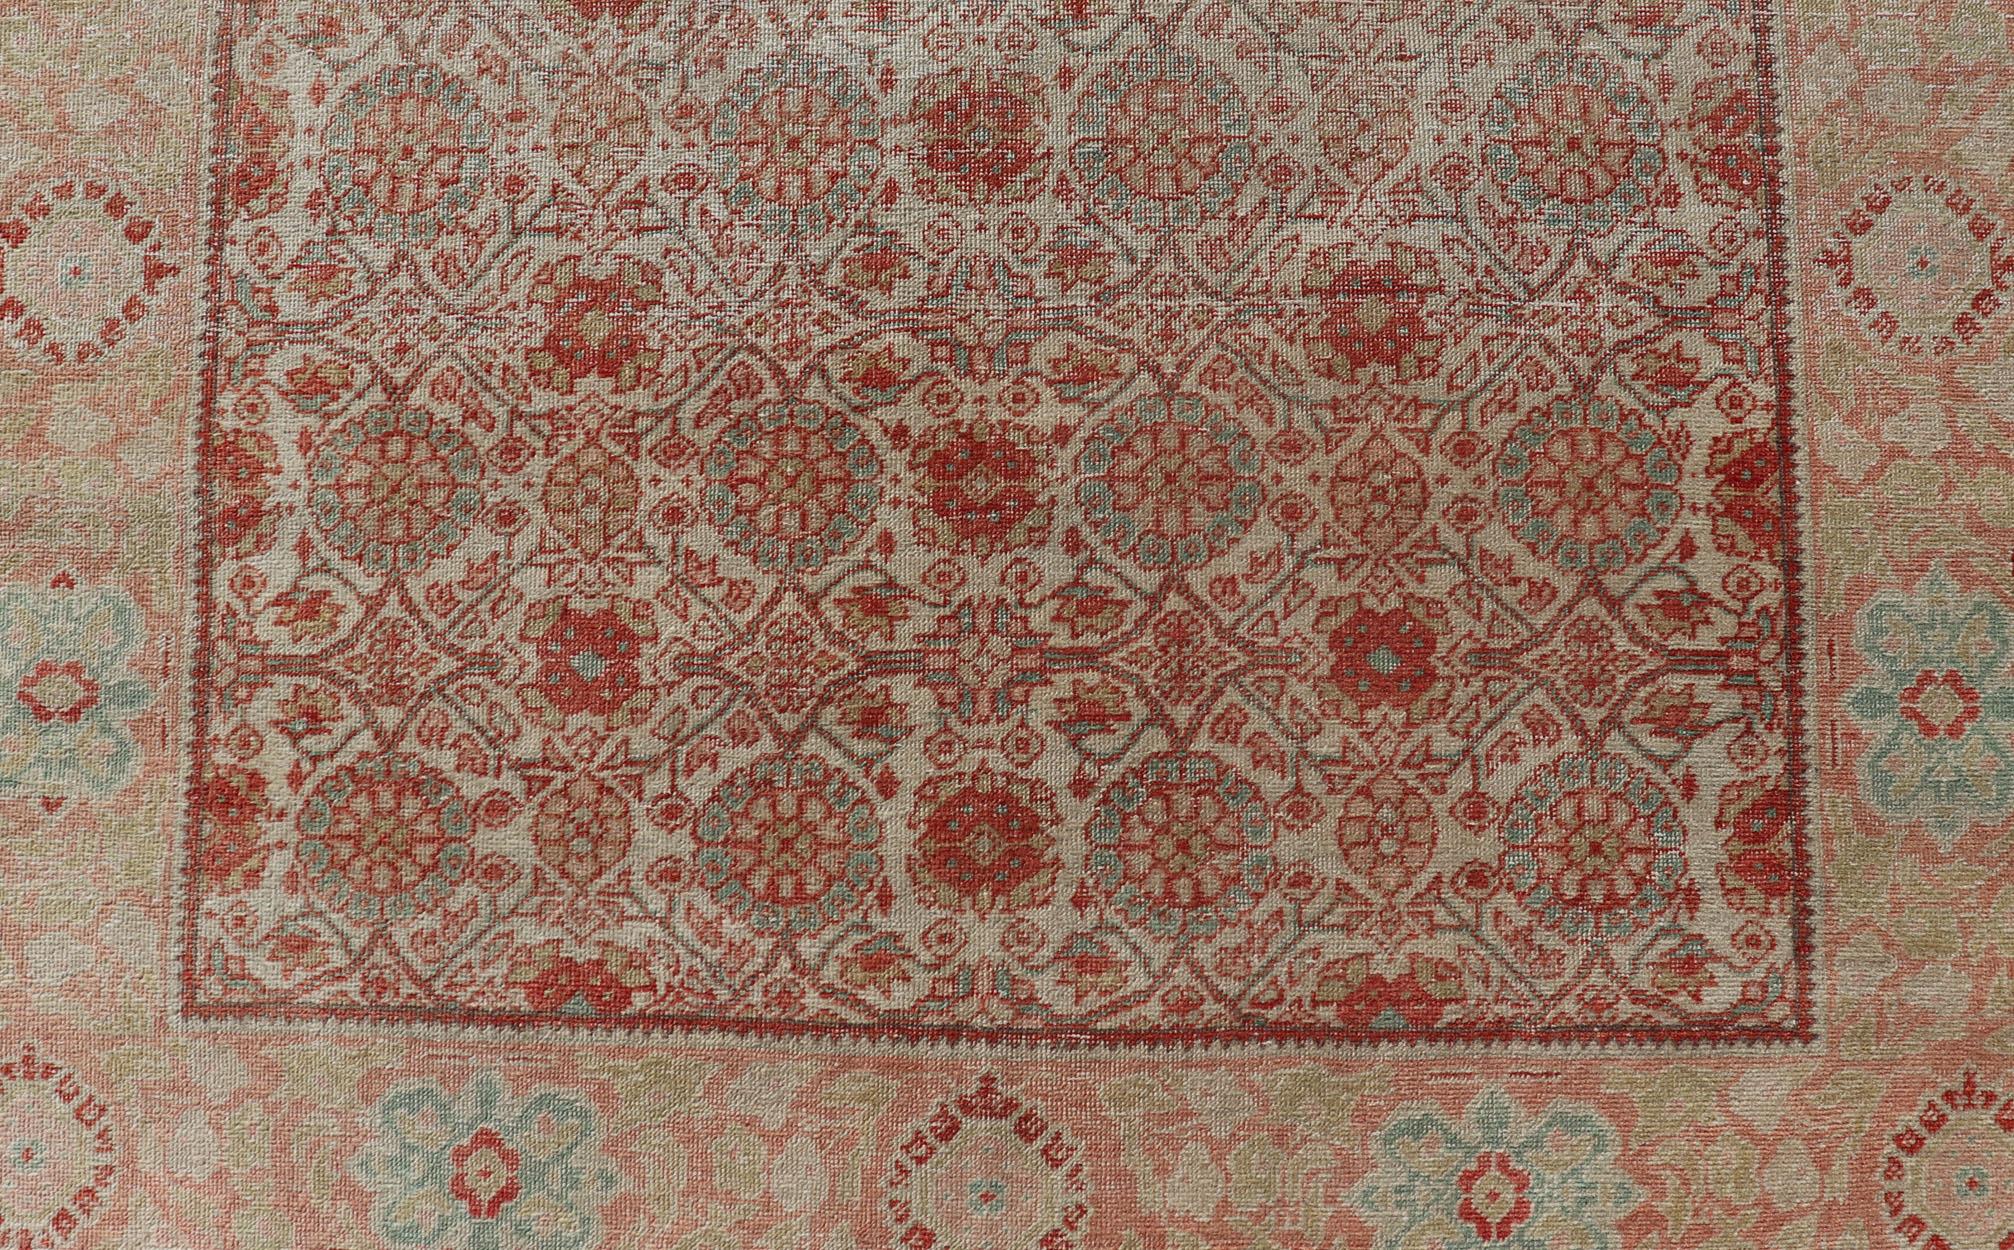 20th Century Persian Tabriz Rug with Boteh Design in Cream, Coral, Light Green/ Blue For Sale